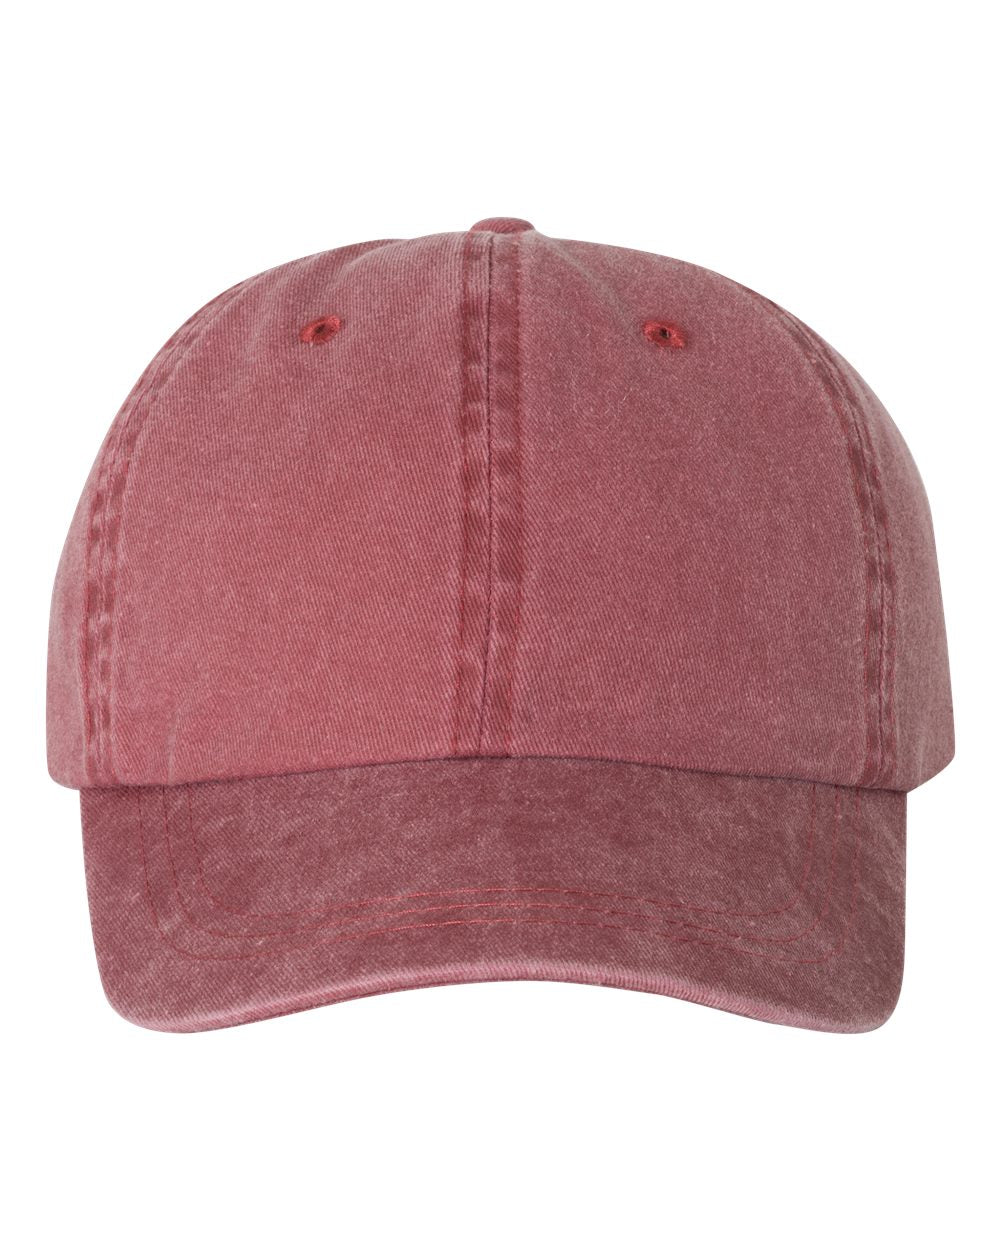 Embroidered Hand Stitch Effect Font on Pigment-Dyed Twill Hat 5-7 Business Day TAT